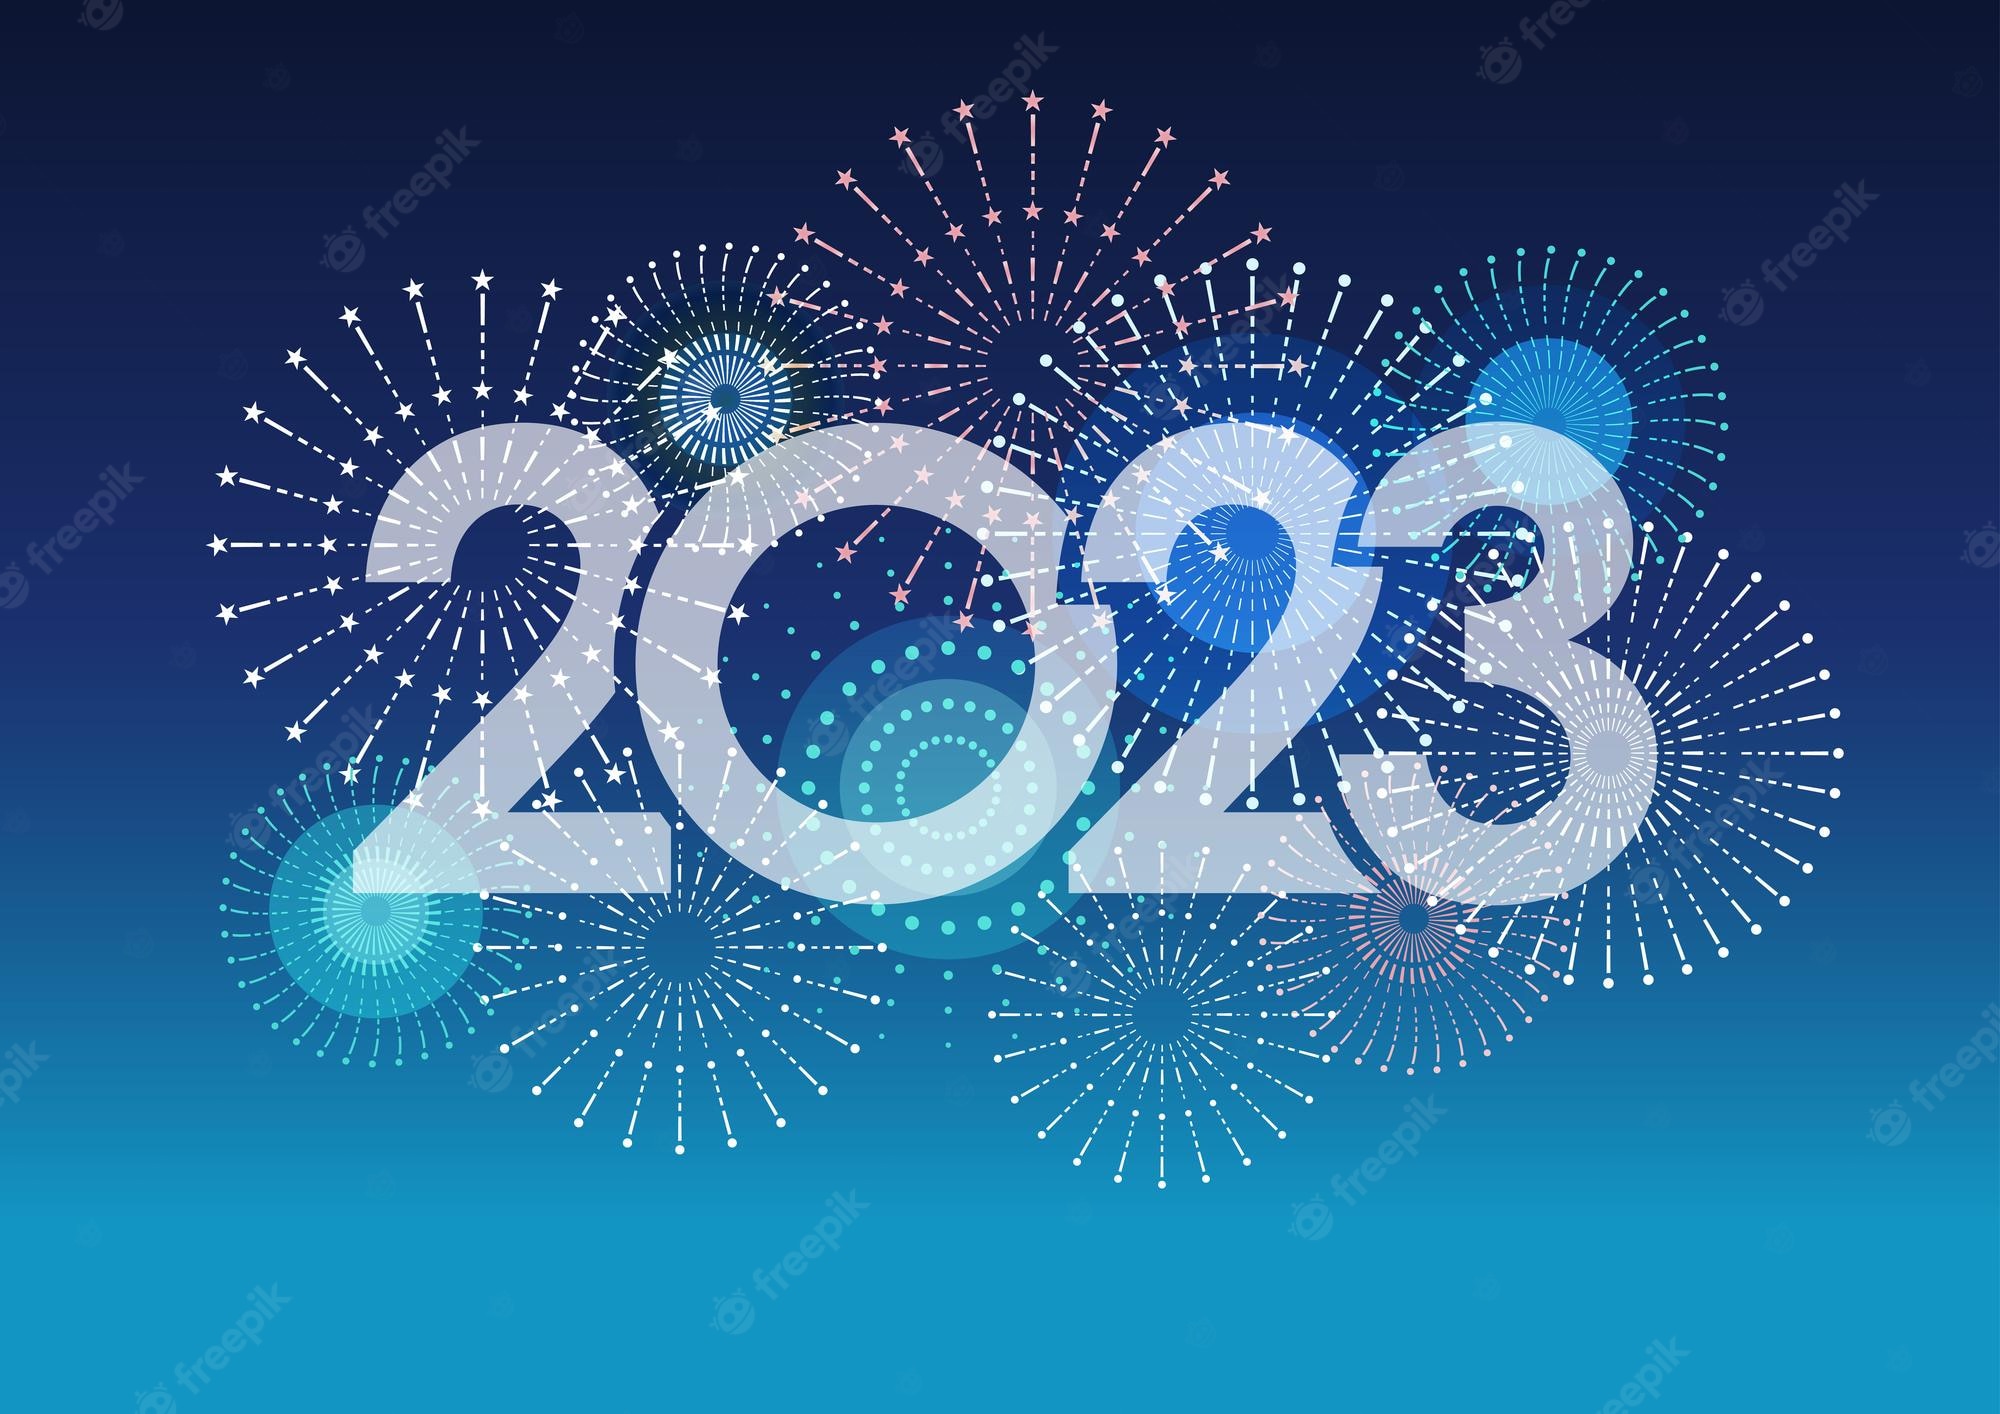 the-year-2023-logo-and-fireworks-on-a-blue-background-vector-illustration_8130-1117.jpg